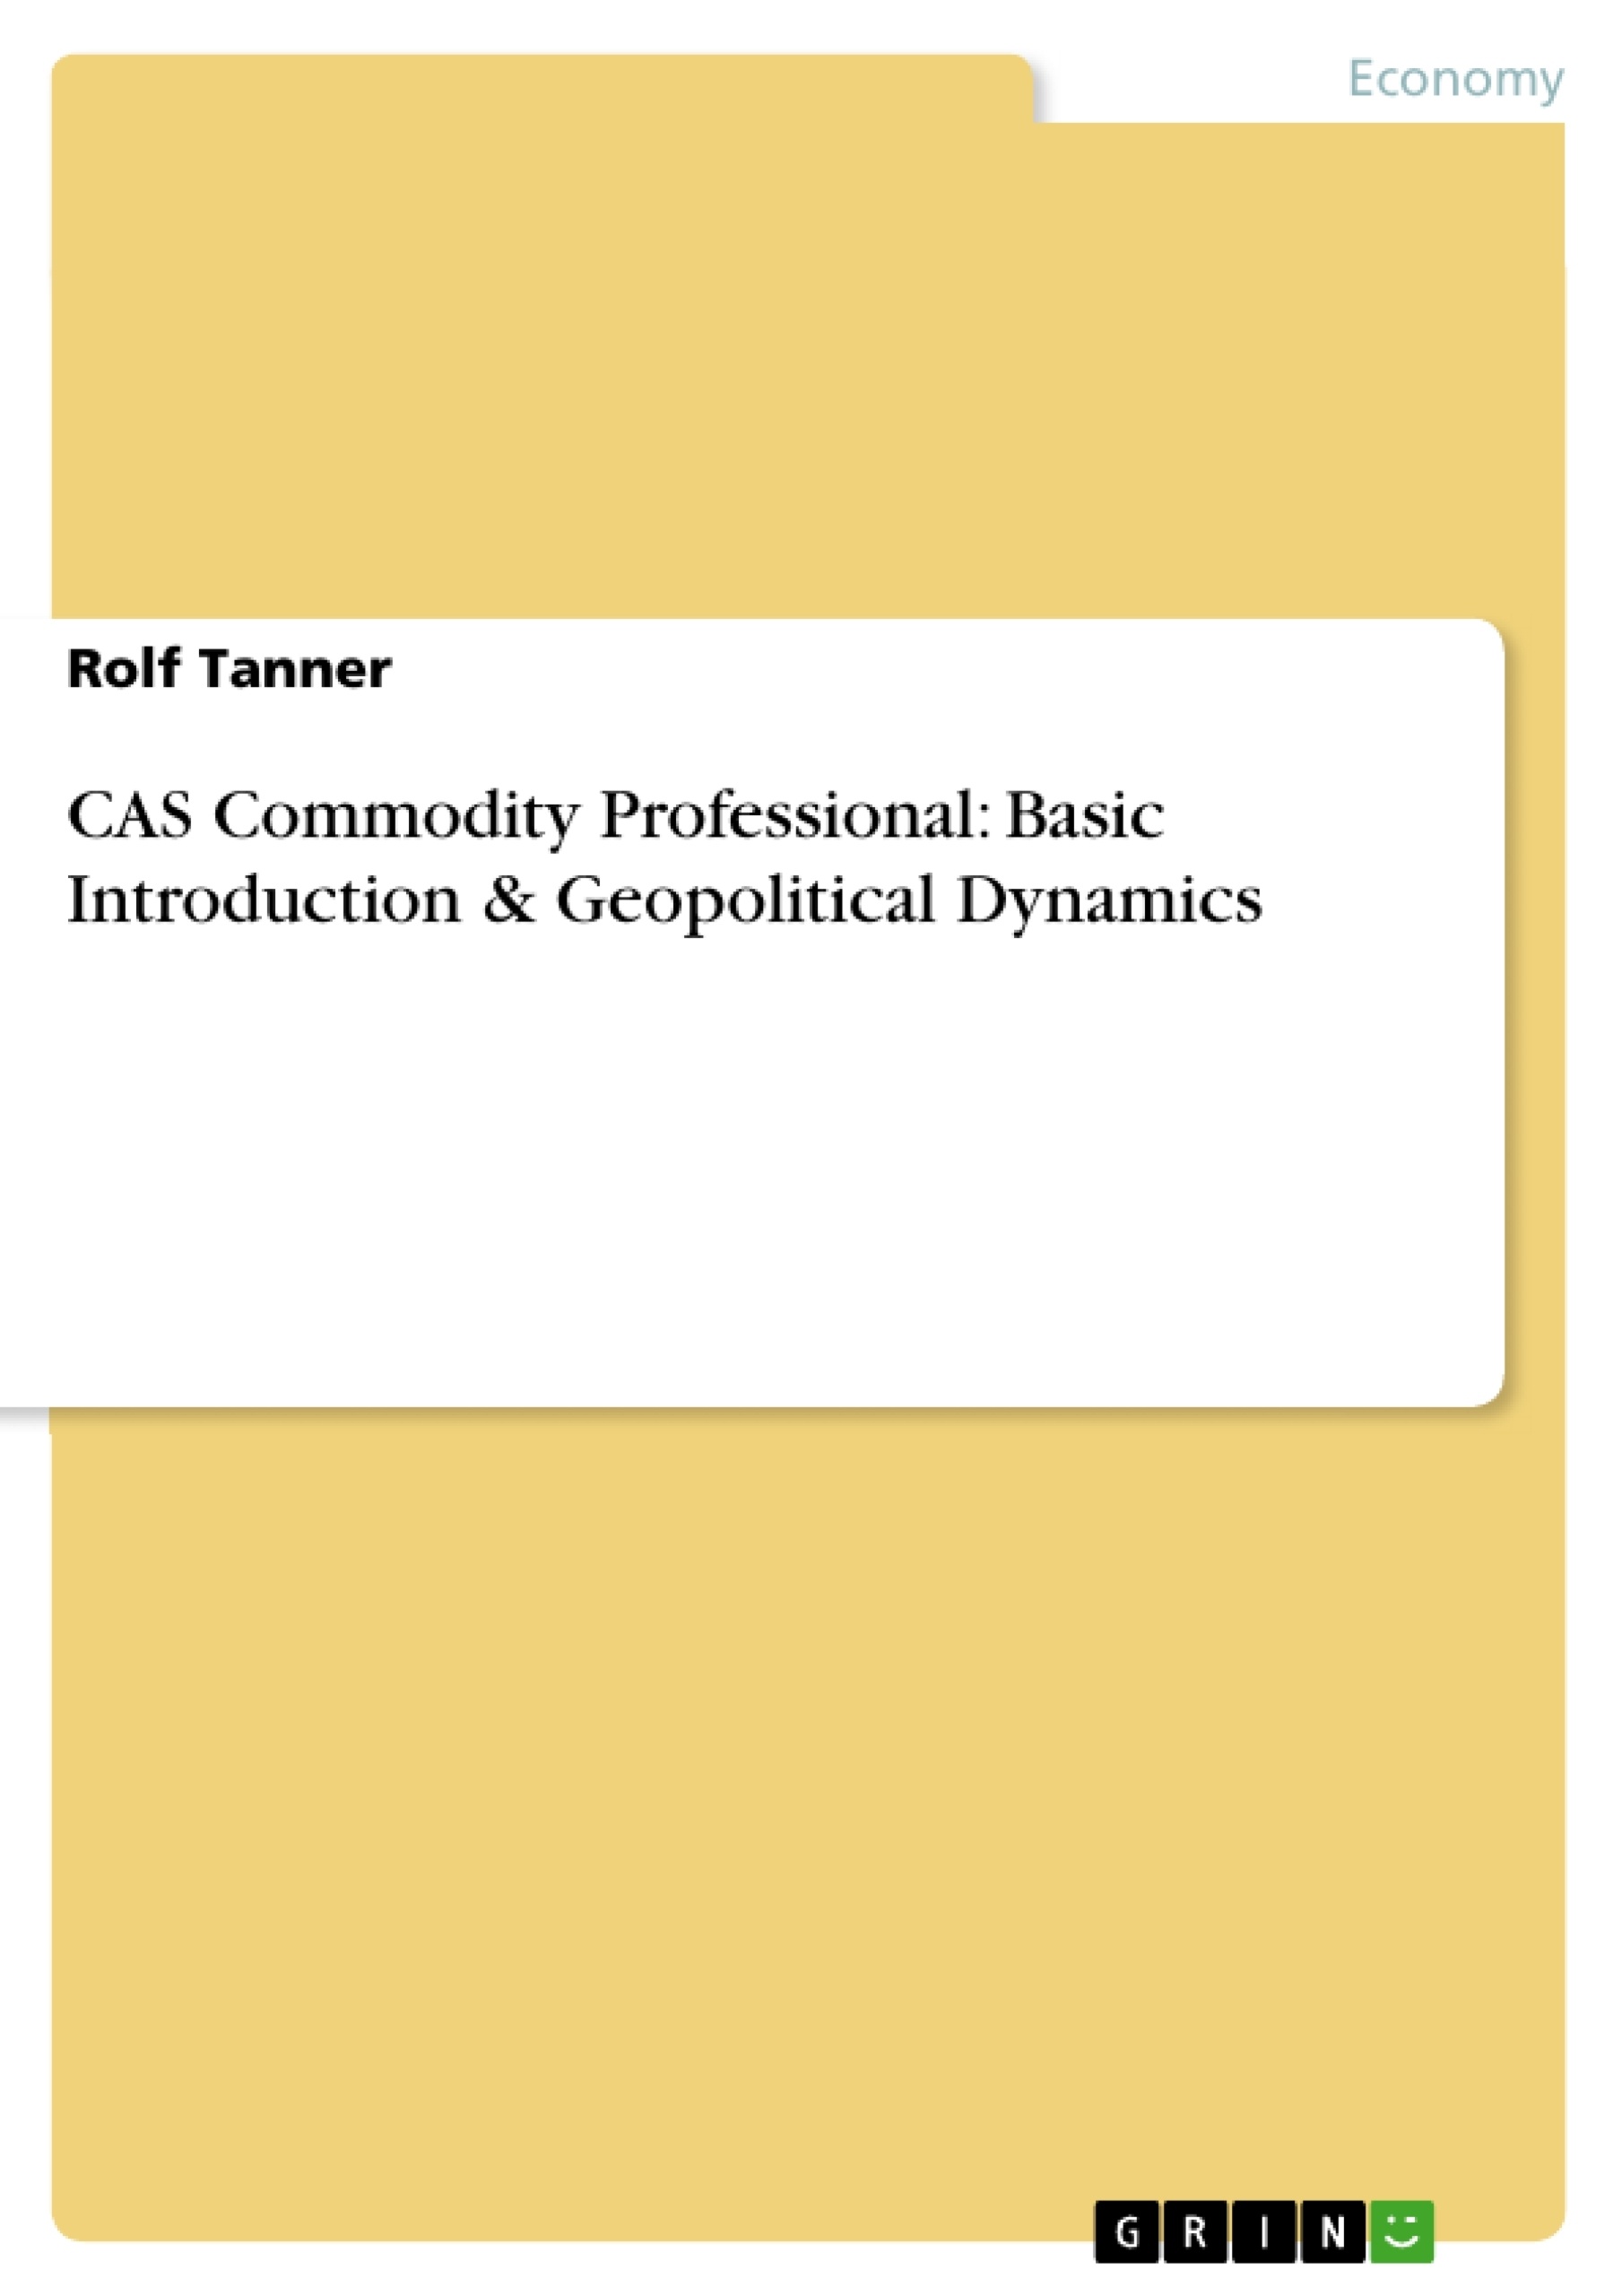 Title: CAS Commodity Professional: Basic Introduction & Geopolitical Dynamics